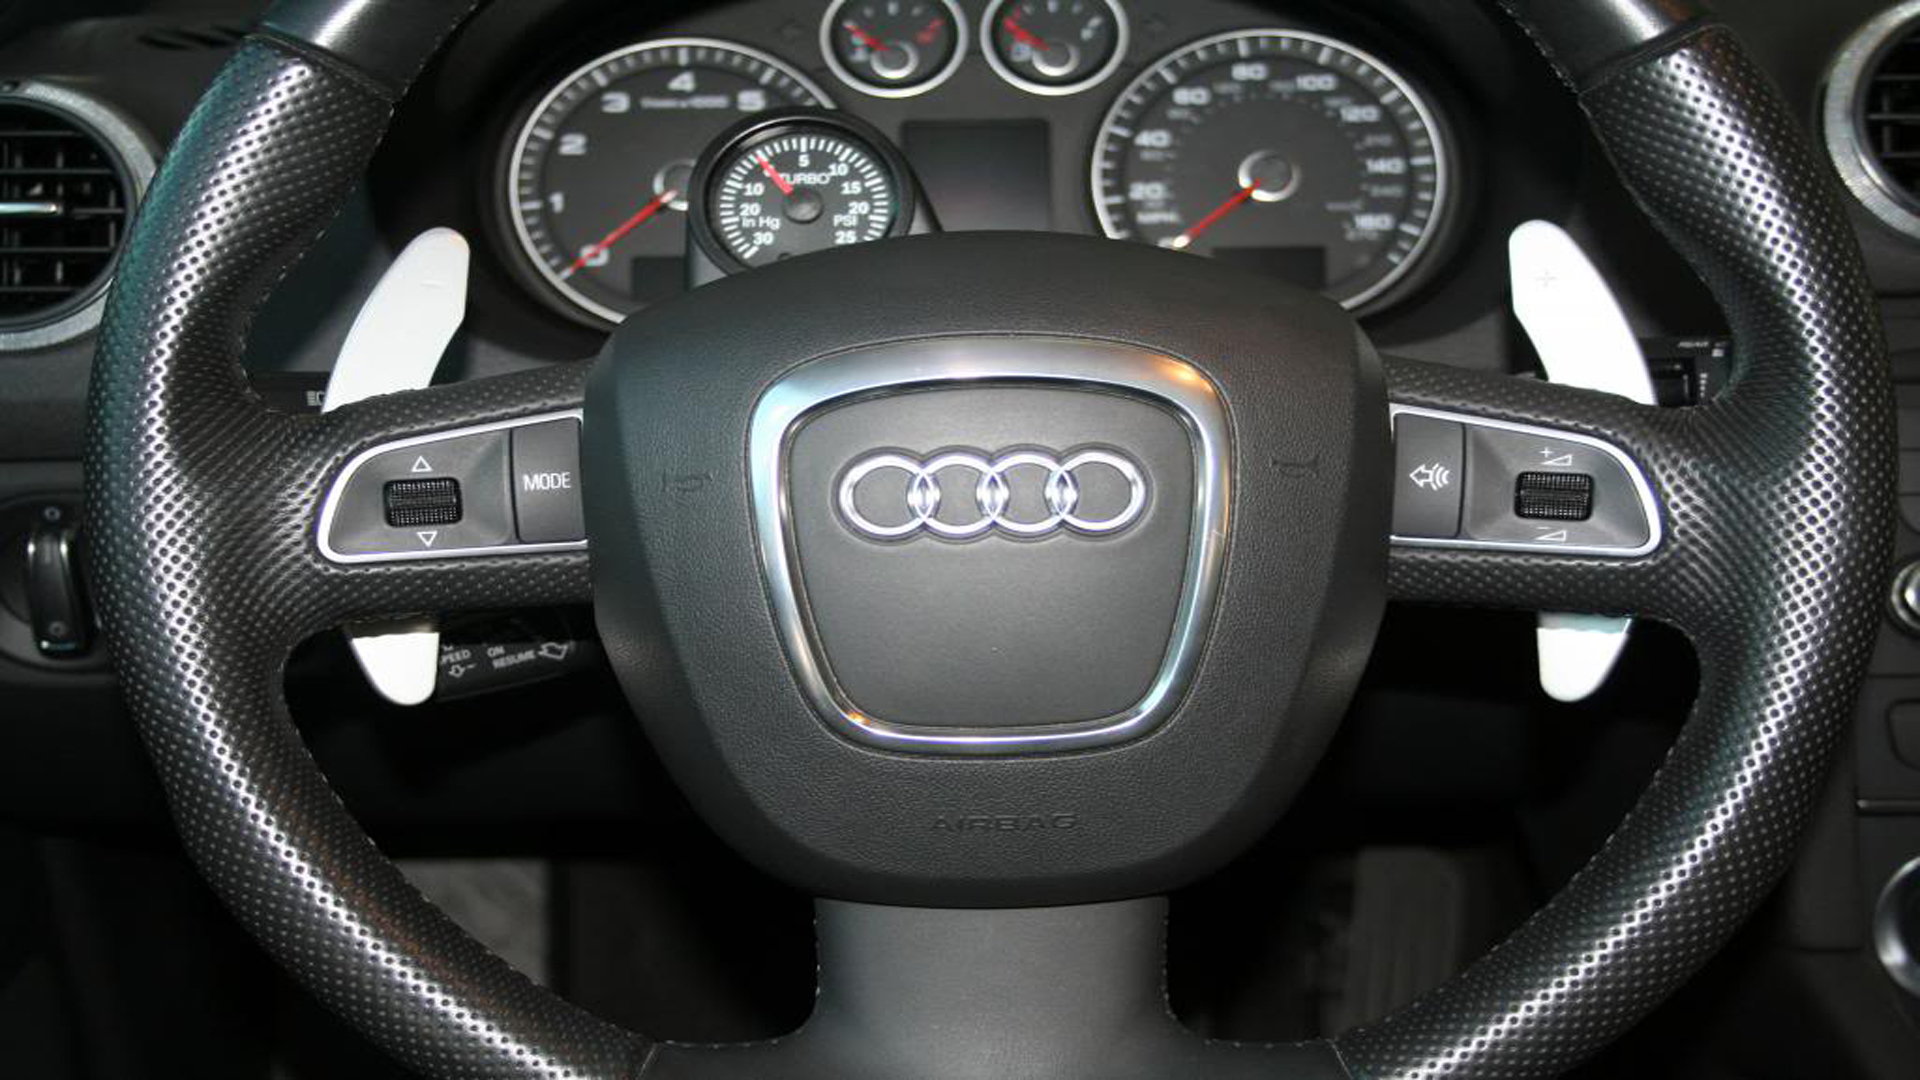 Audi A4 B8 - How to install and activate F1 paddle shifters